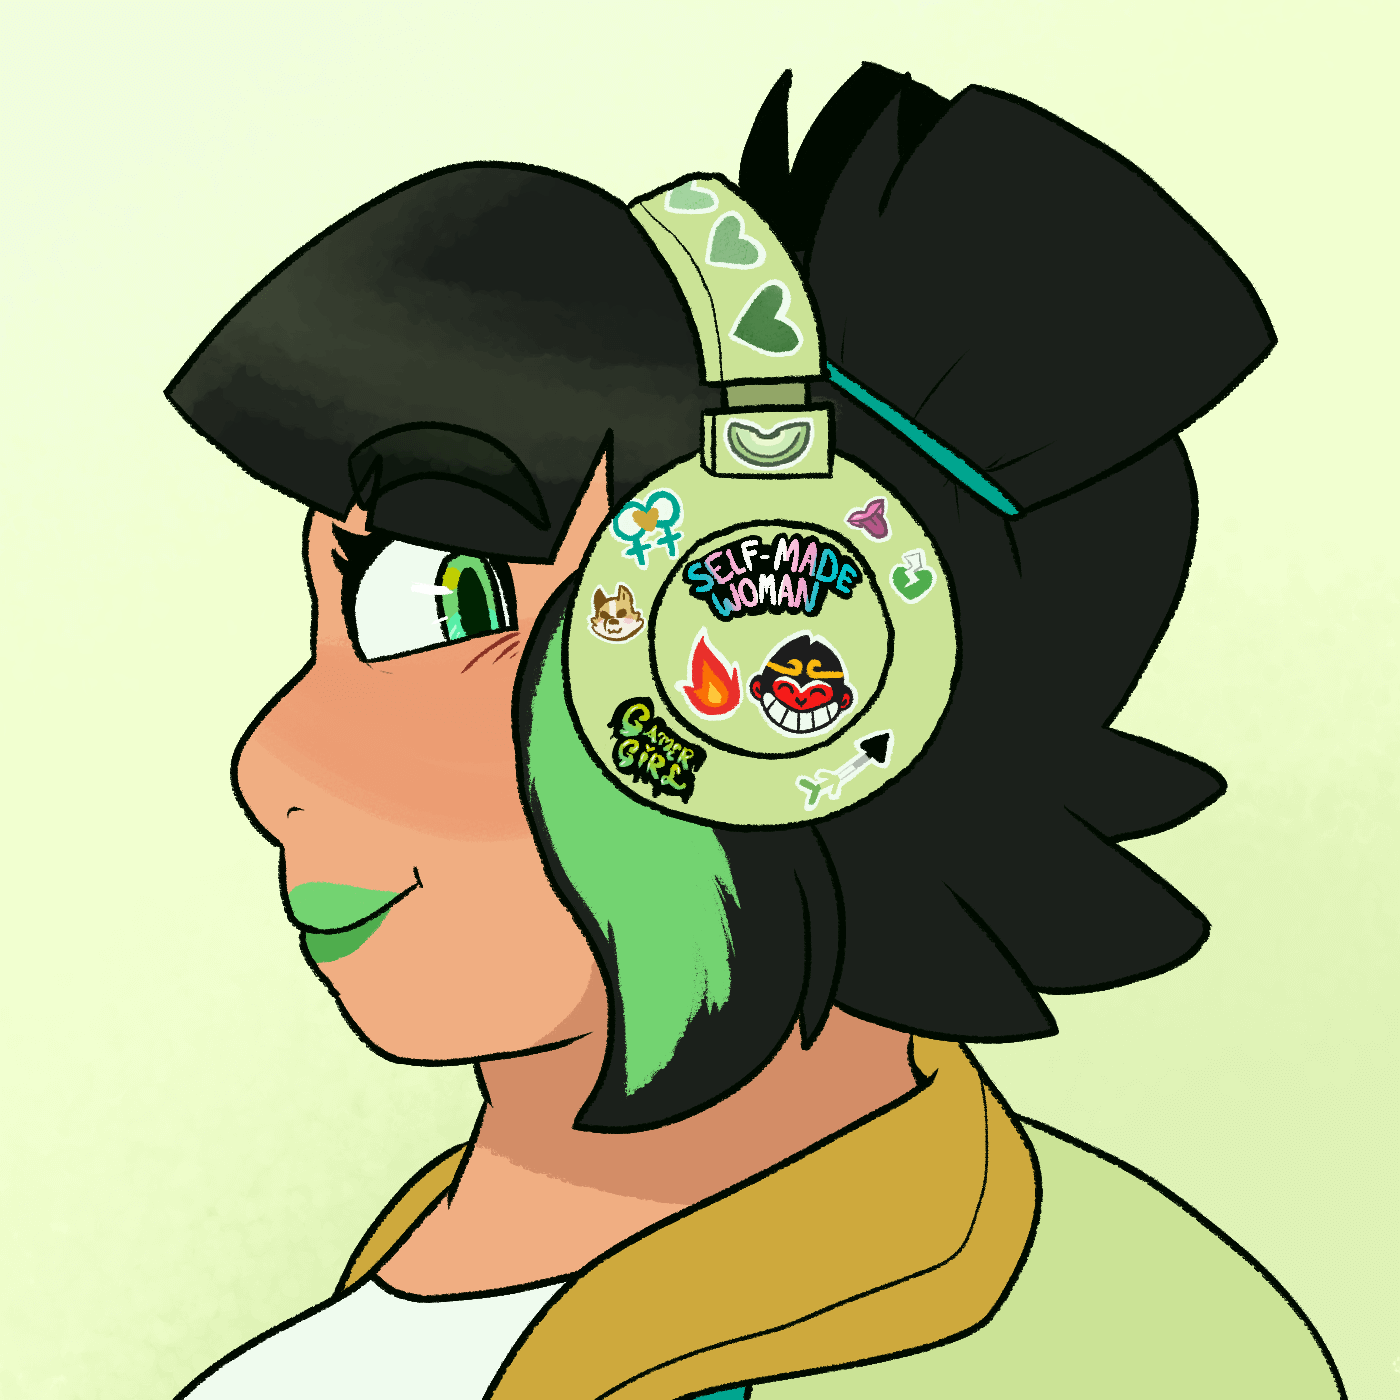 LEGO Monkie Kid fanart of Mei wearing green headphones. It's a side view, and she's grinning at the viewer. Her headphones have a number of stickers on it, including ones of hearts, a double venus symbol, an aro pride sticker, the phrase 'self-made woman' with the trans pride colors, a corgi, and the phrase 'gamer girl'. In the middle of the visible ear cover to our side, there is a sticker of the smiling monkey symbol from MK's jacket, and a flame.